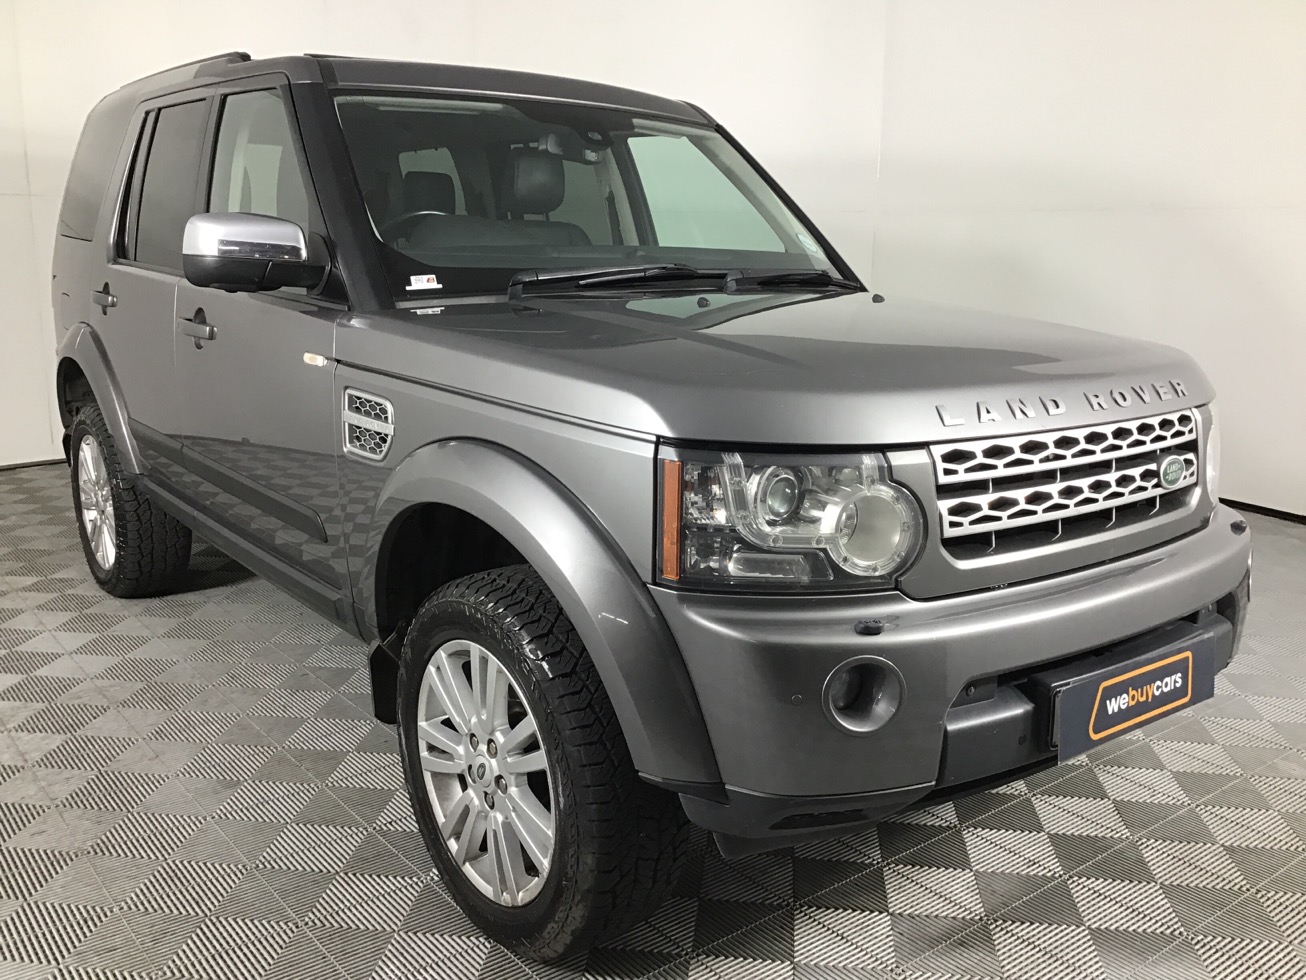 Used 2011 Land Rover Discovery 4 5.0 V8 HSE for sale